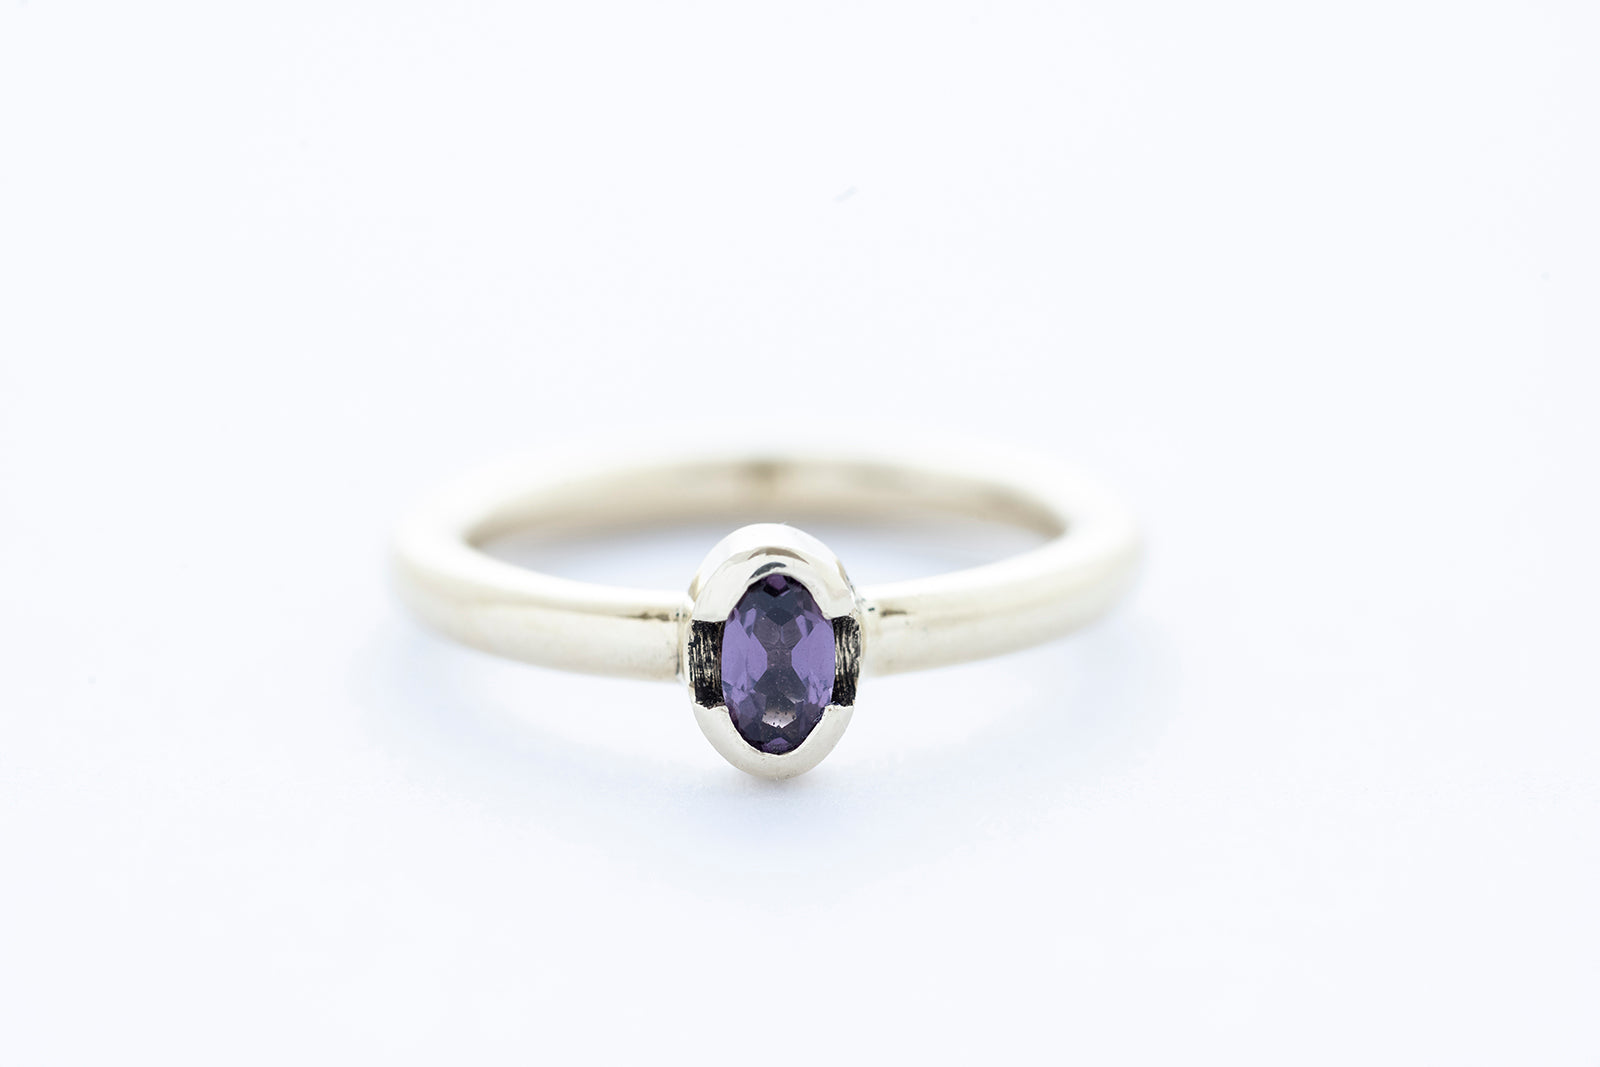 ELLIPSE ring - 14K yellow gold w. orchid purple spinel stone